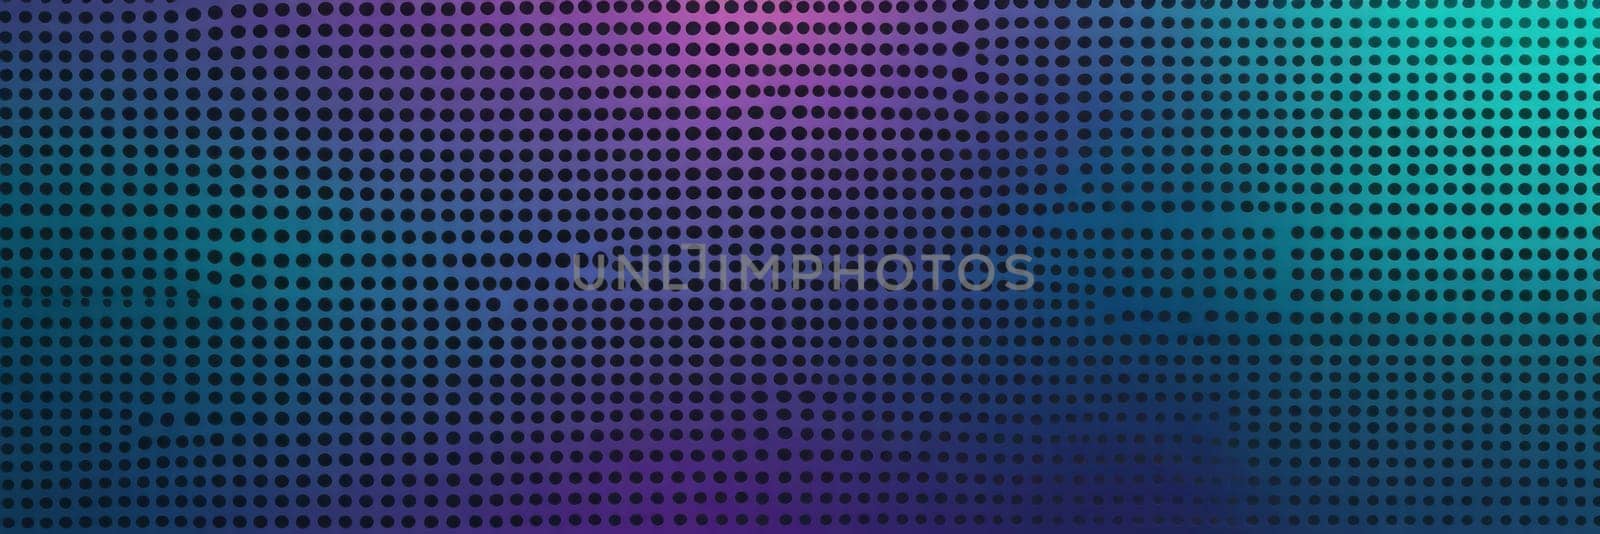 Teal Perforated Shapes Gradient Wallpaper by nkotlyar